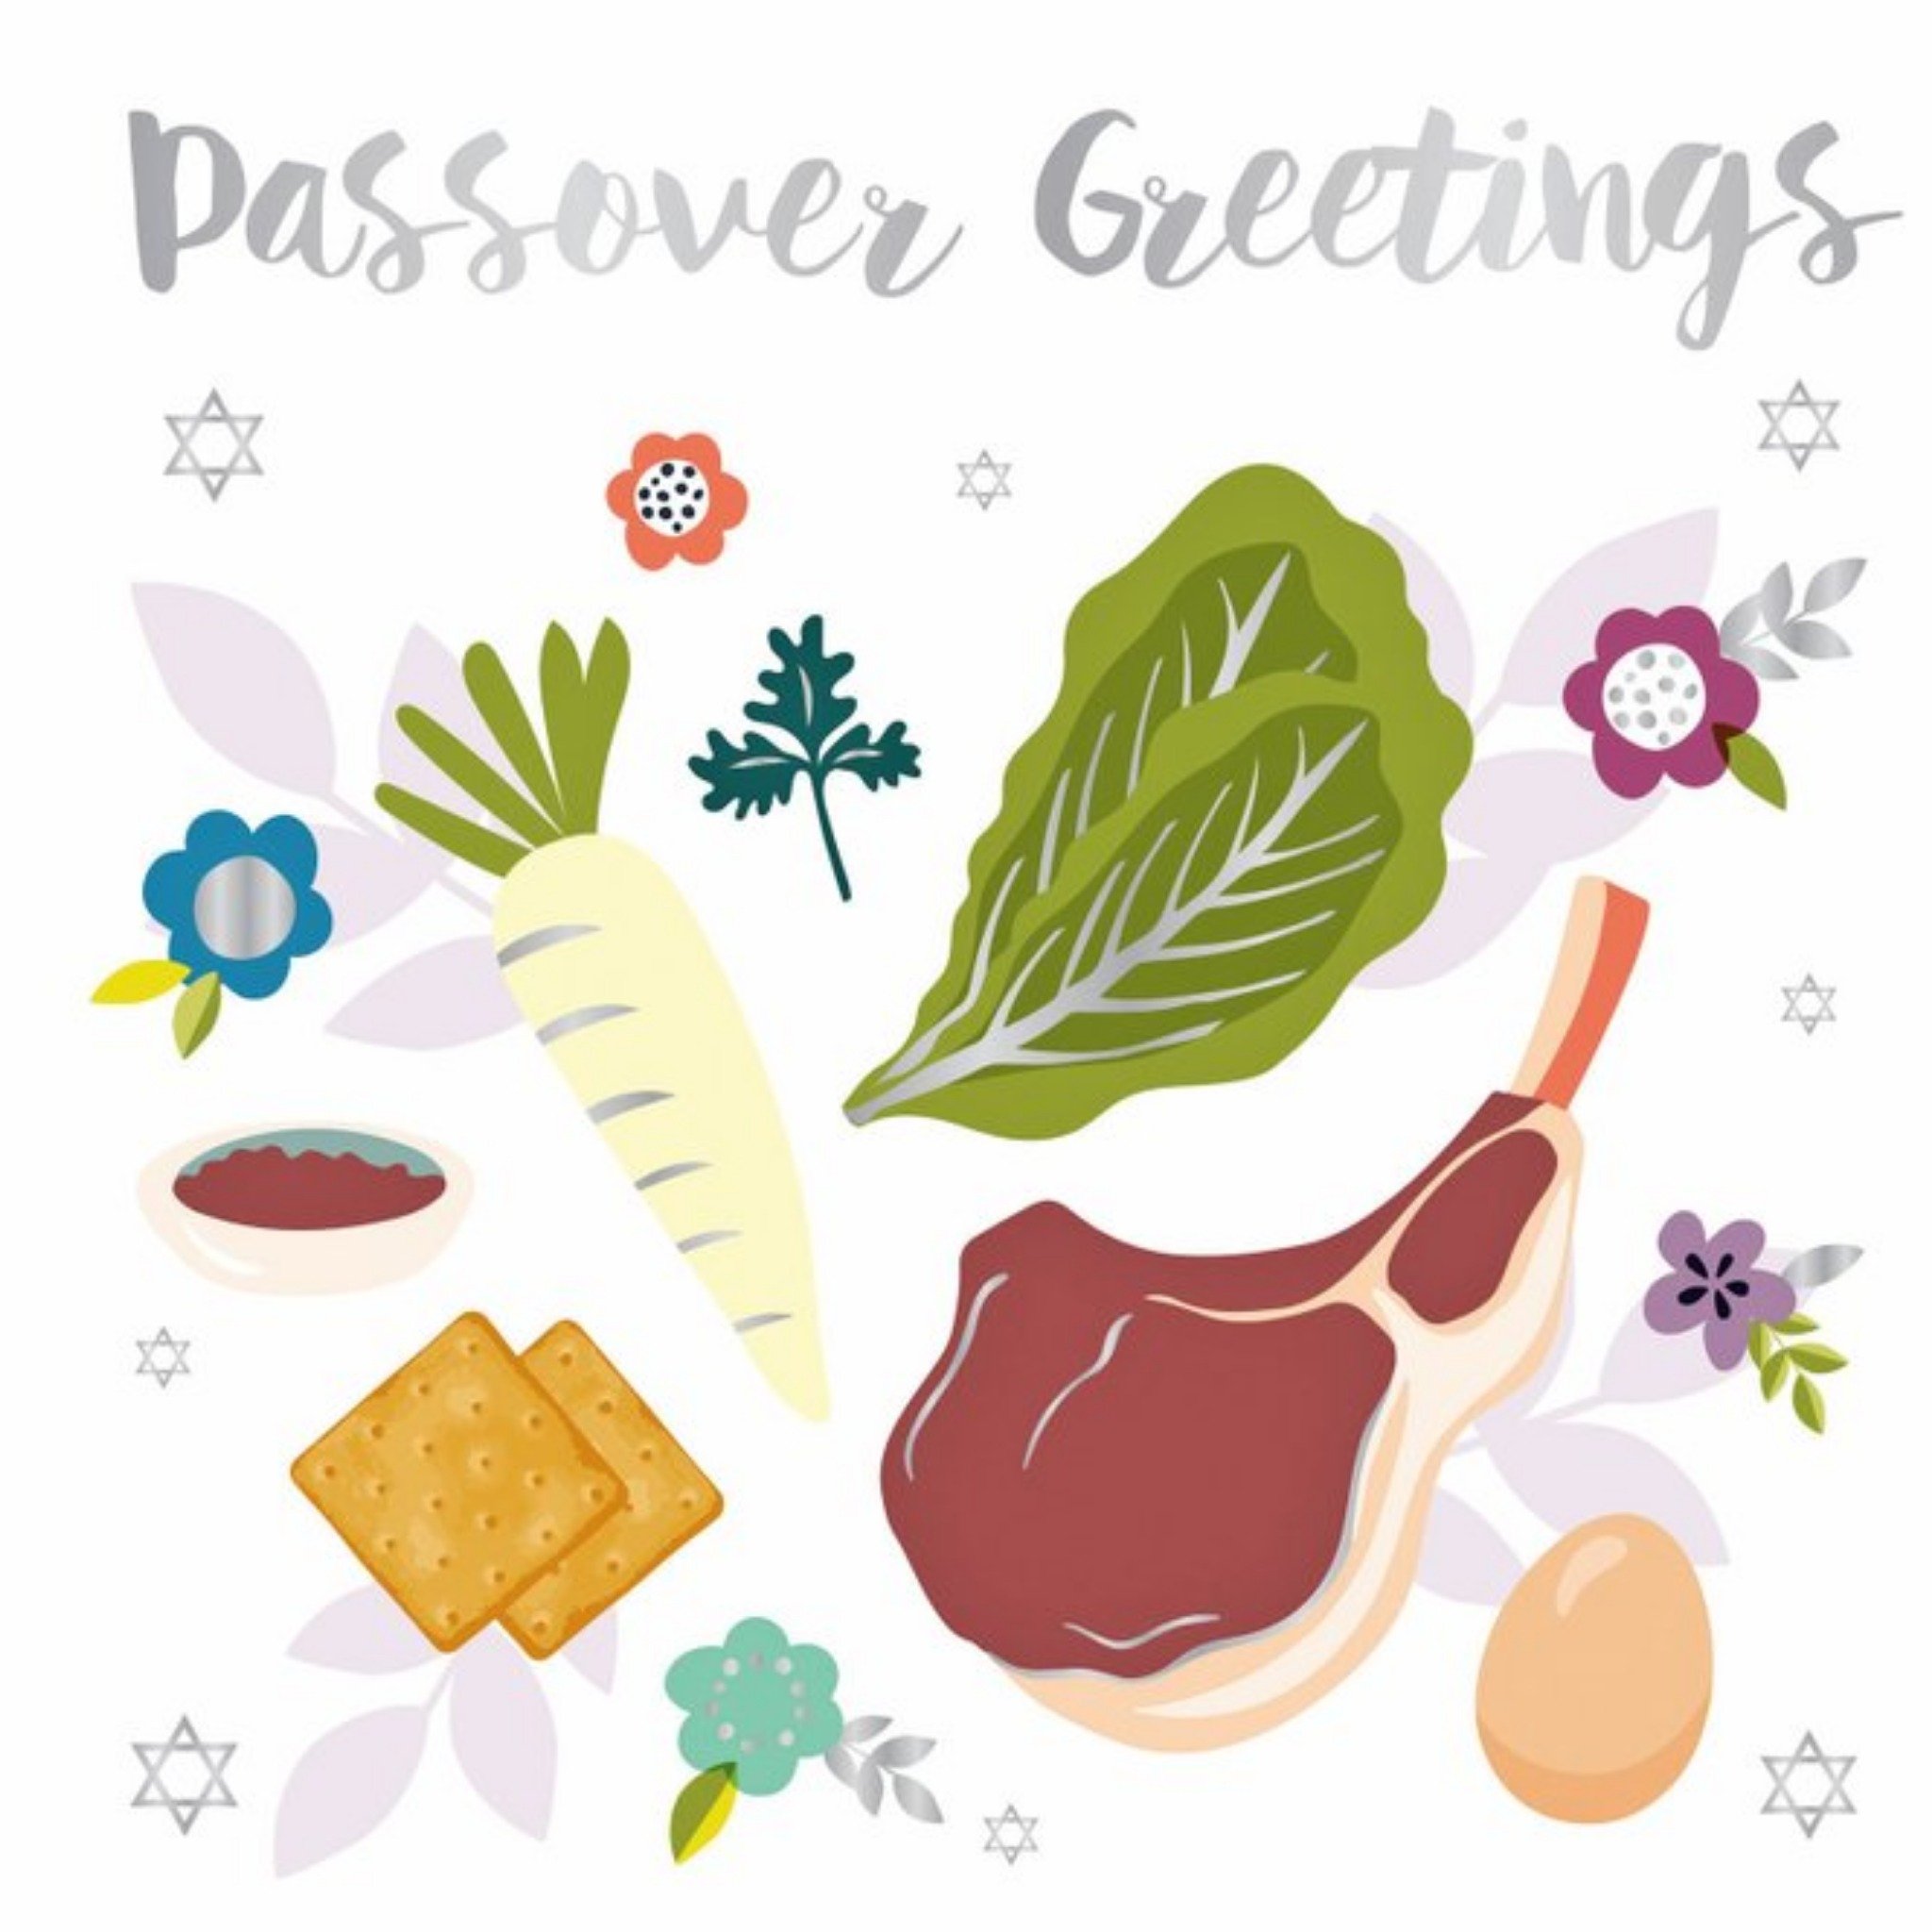 Moonpig Passover Greetings Feast Card, Large